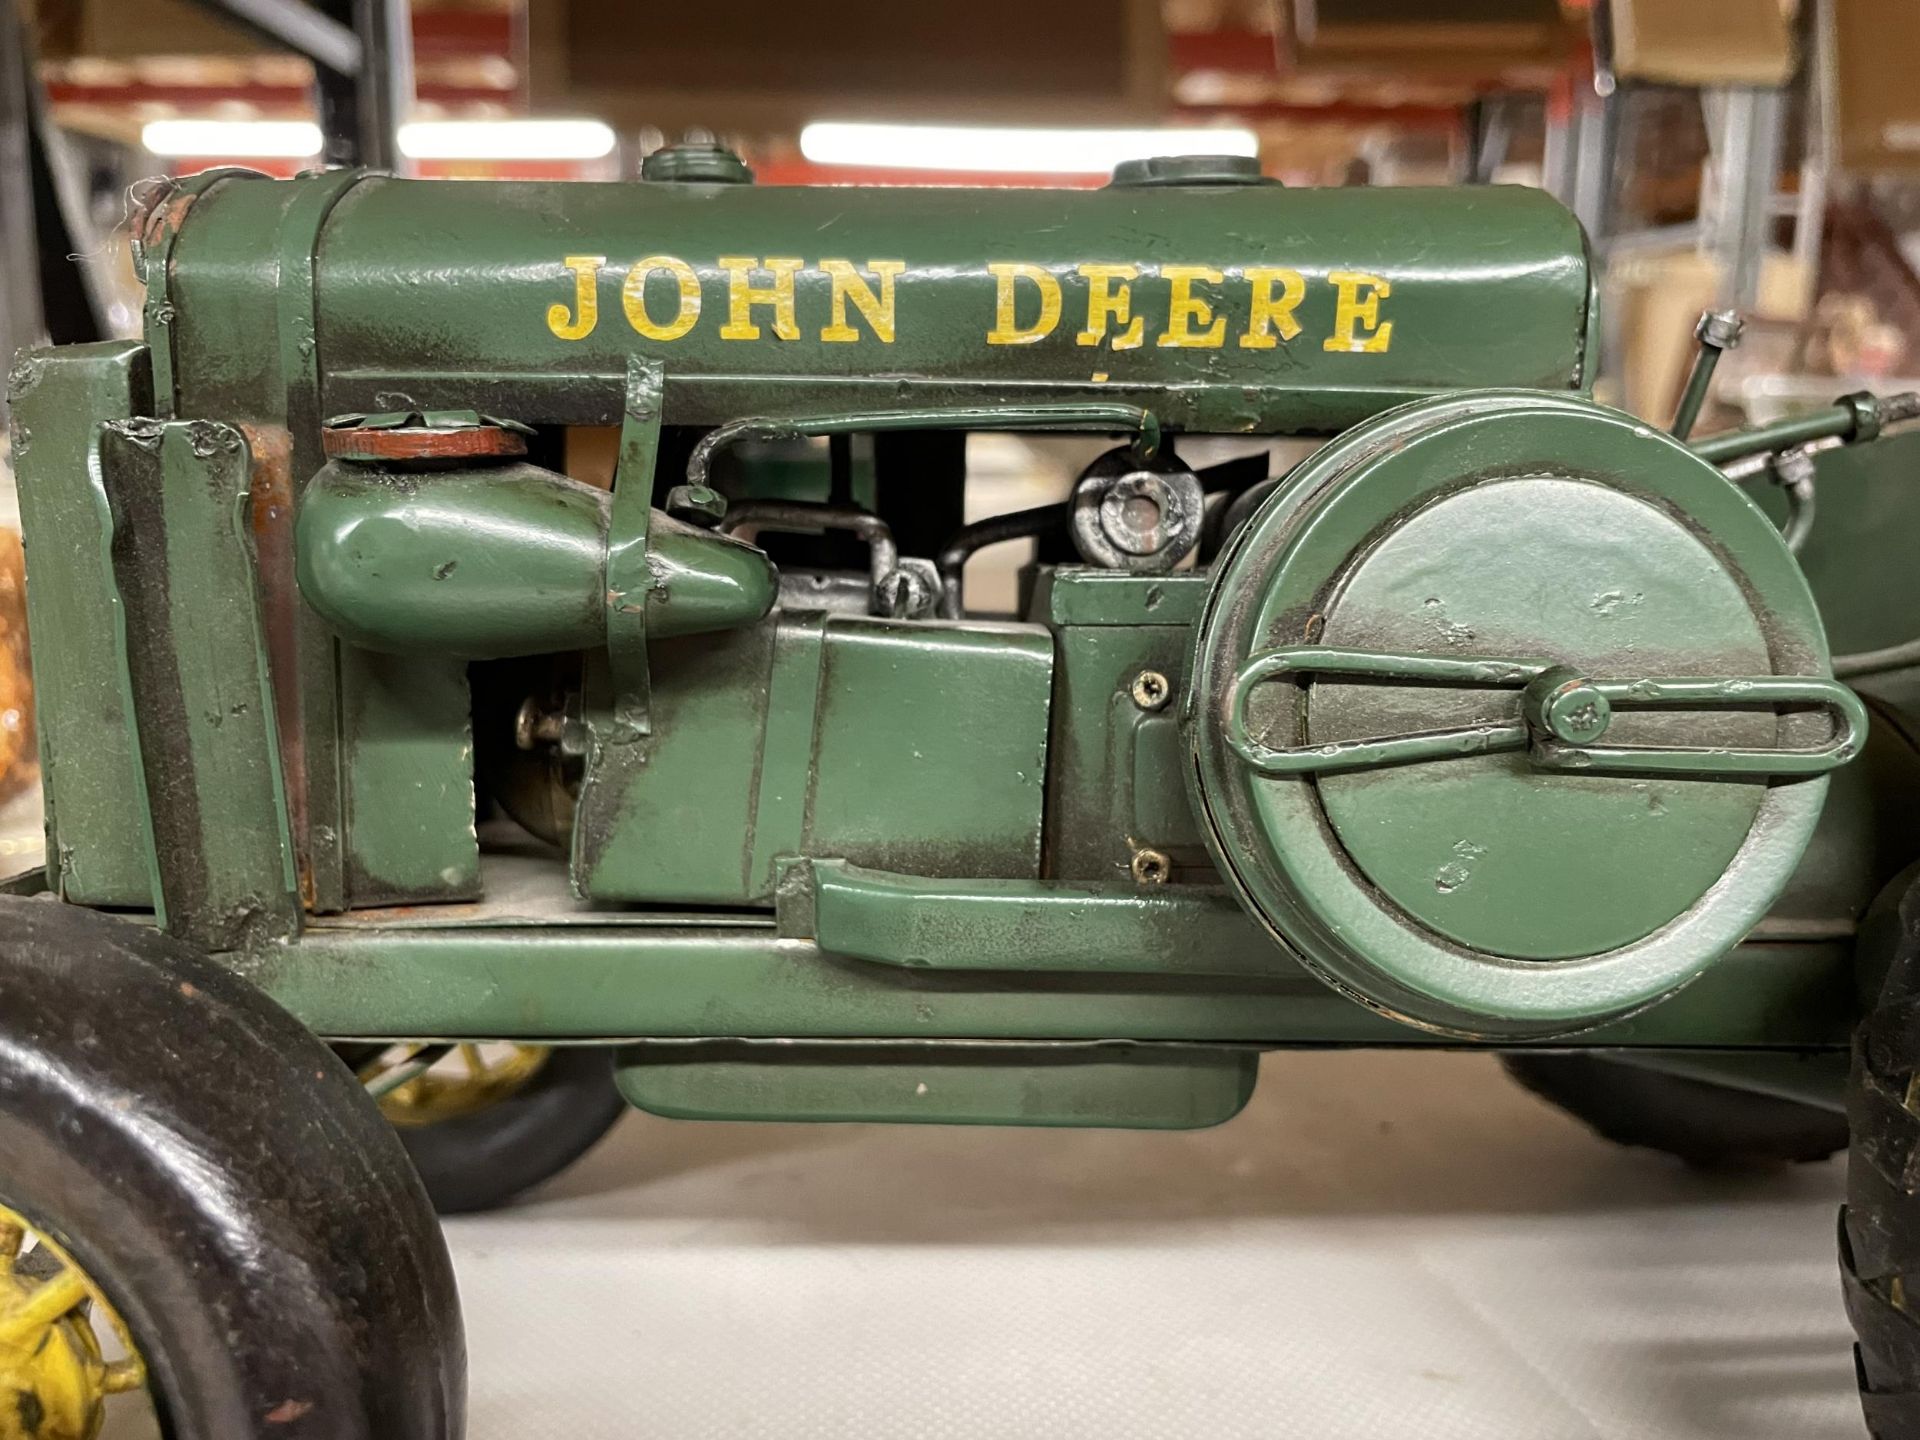 A TIN PLATE MODEL OF A 1931 JOHN DEERE TRACTOR - Image 3 of 4